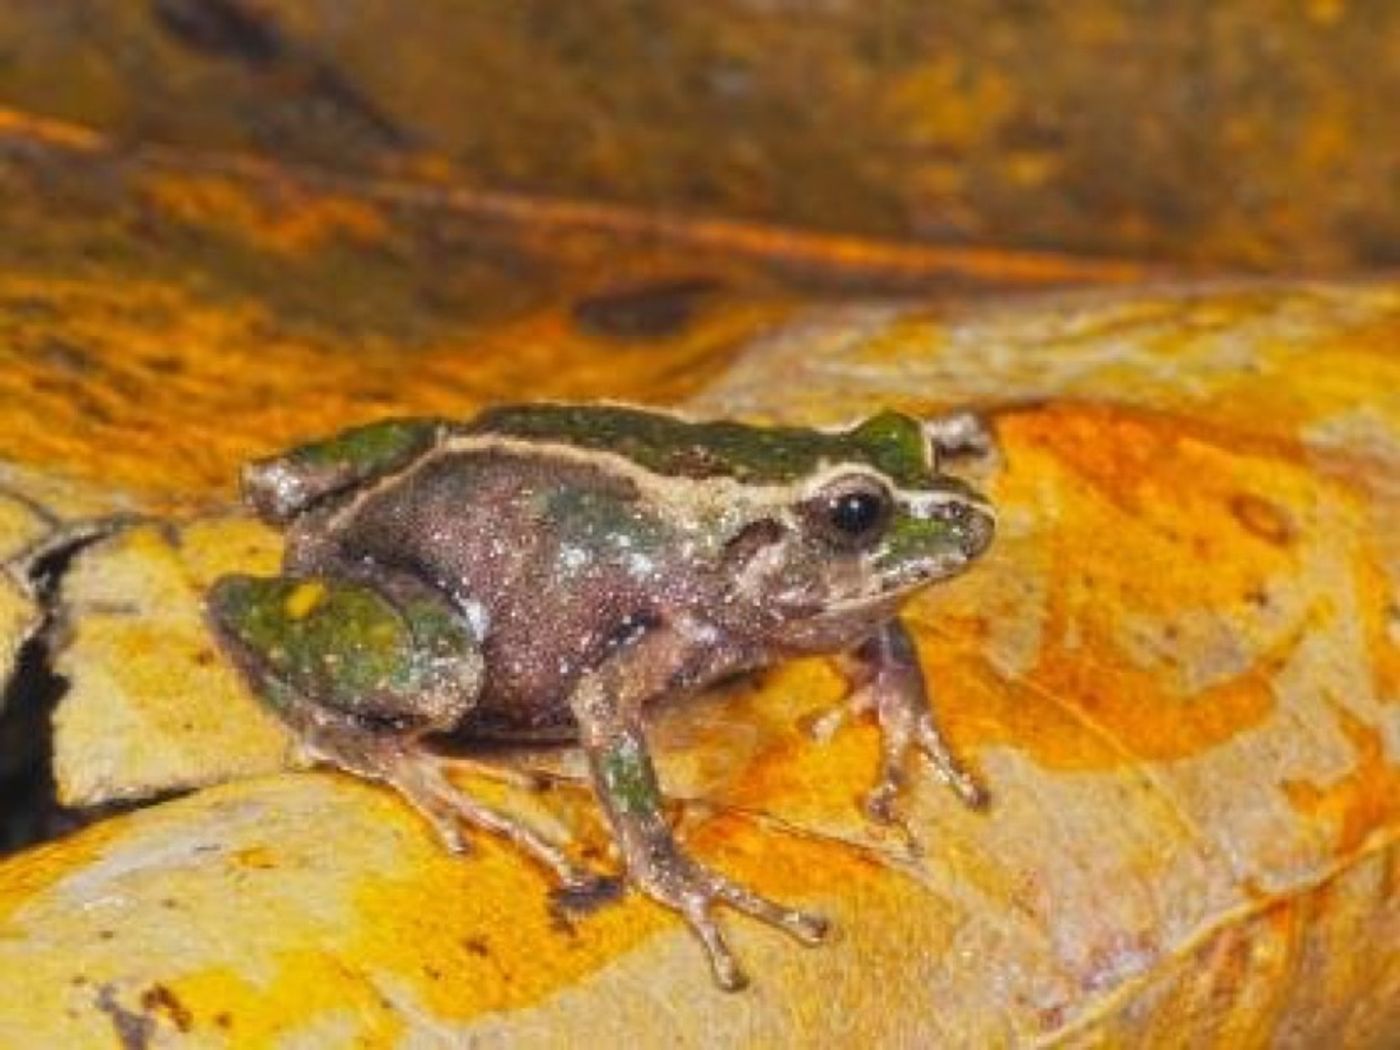 This is one of the newly-discovered frog species.